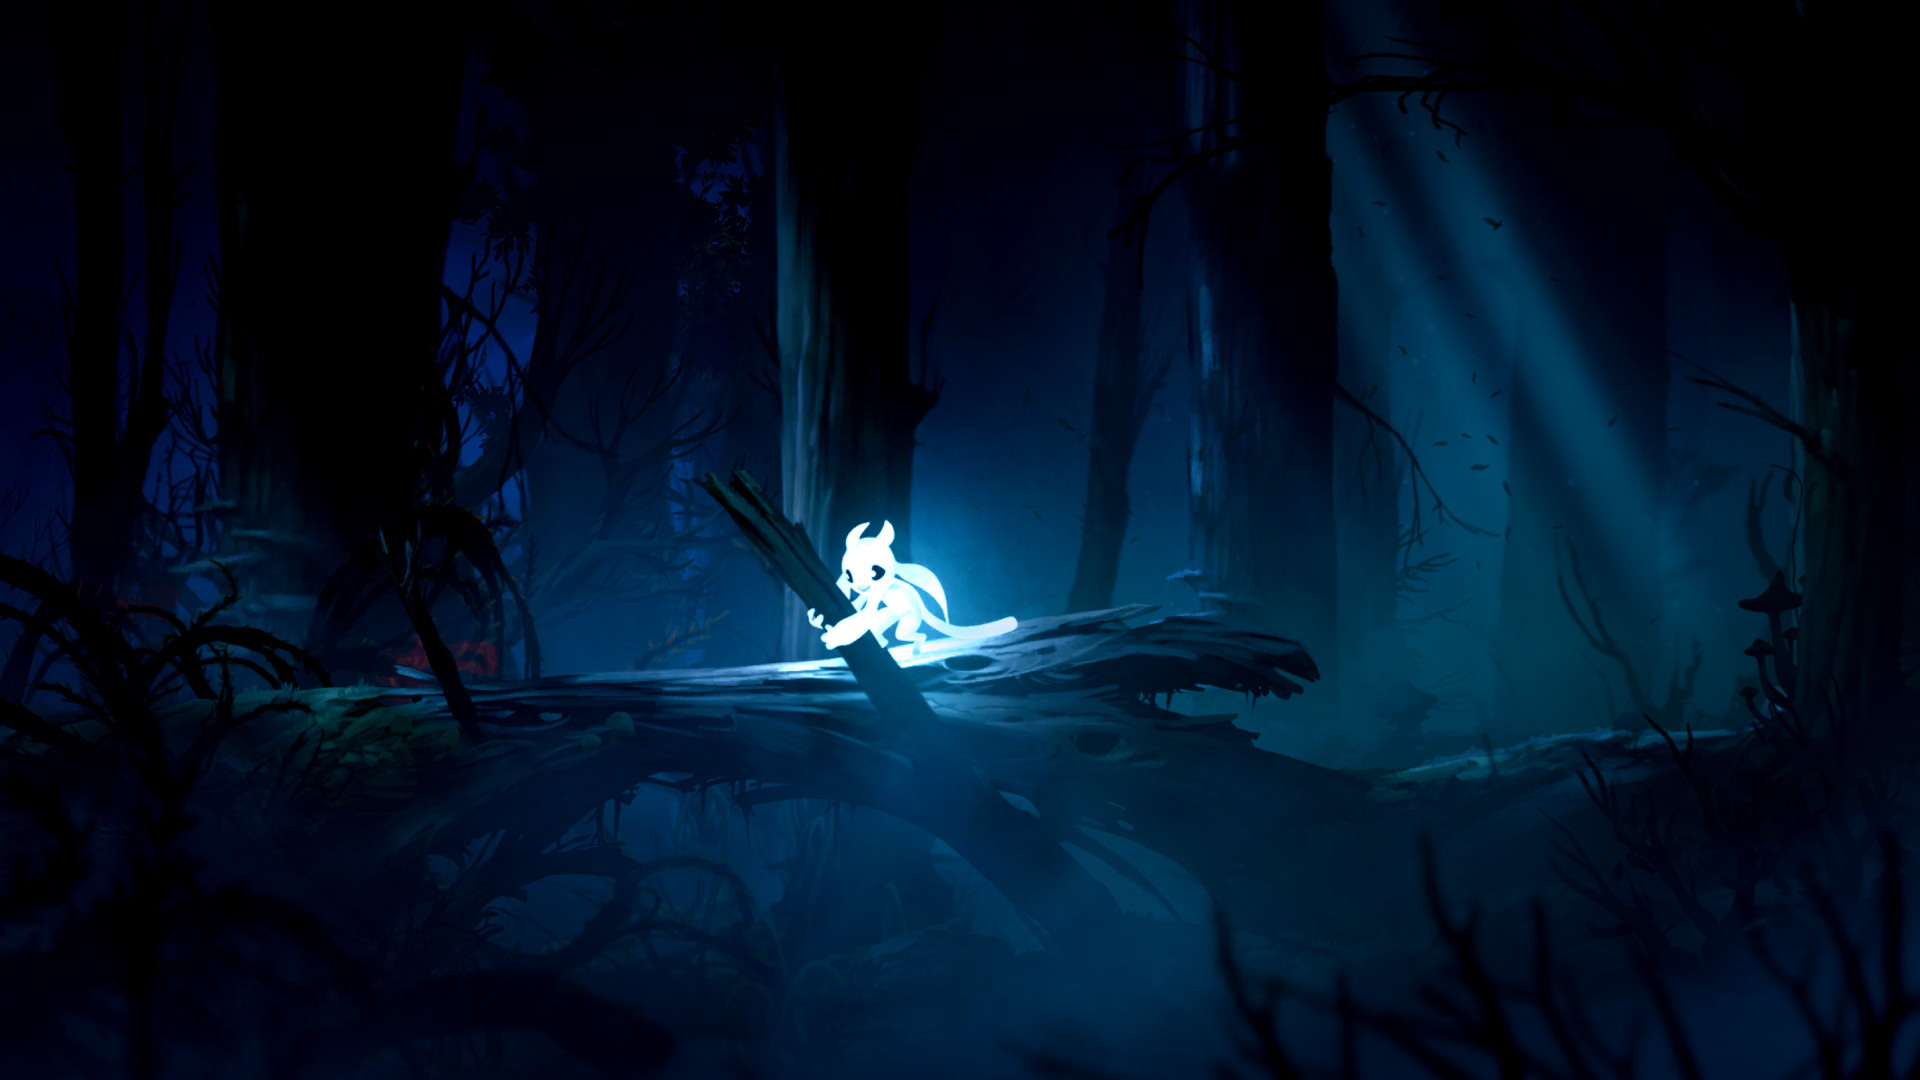 Ori and the Blind Forest: Definitive Edition - Press Kit